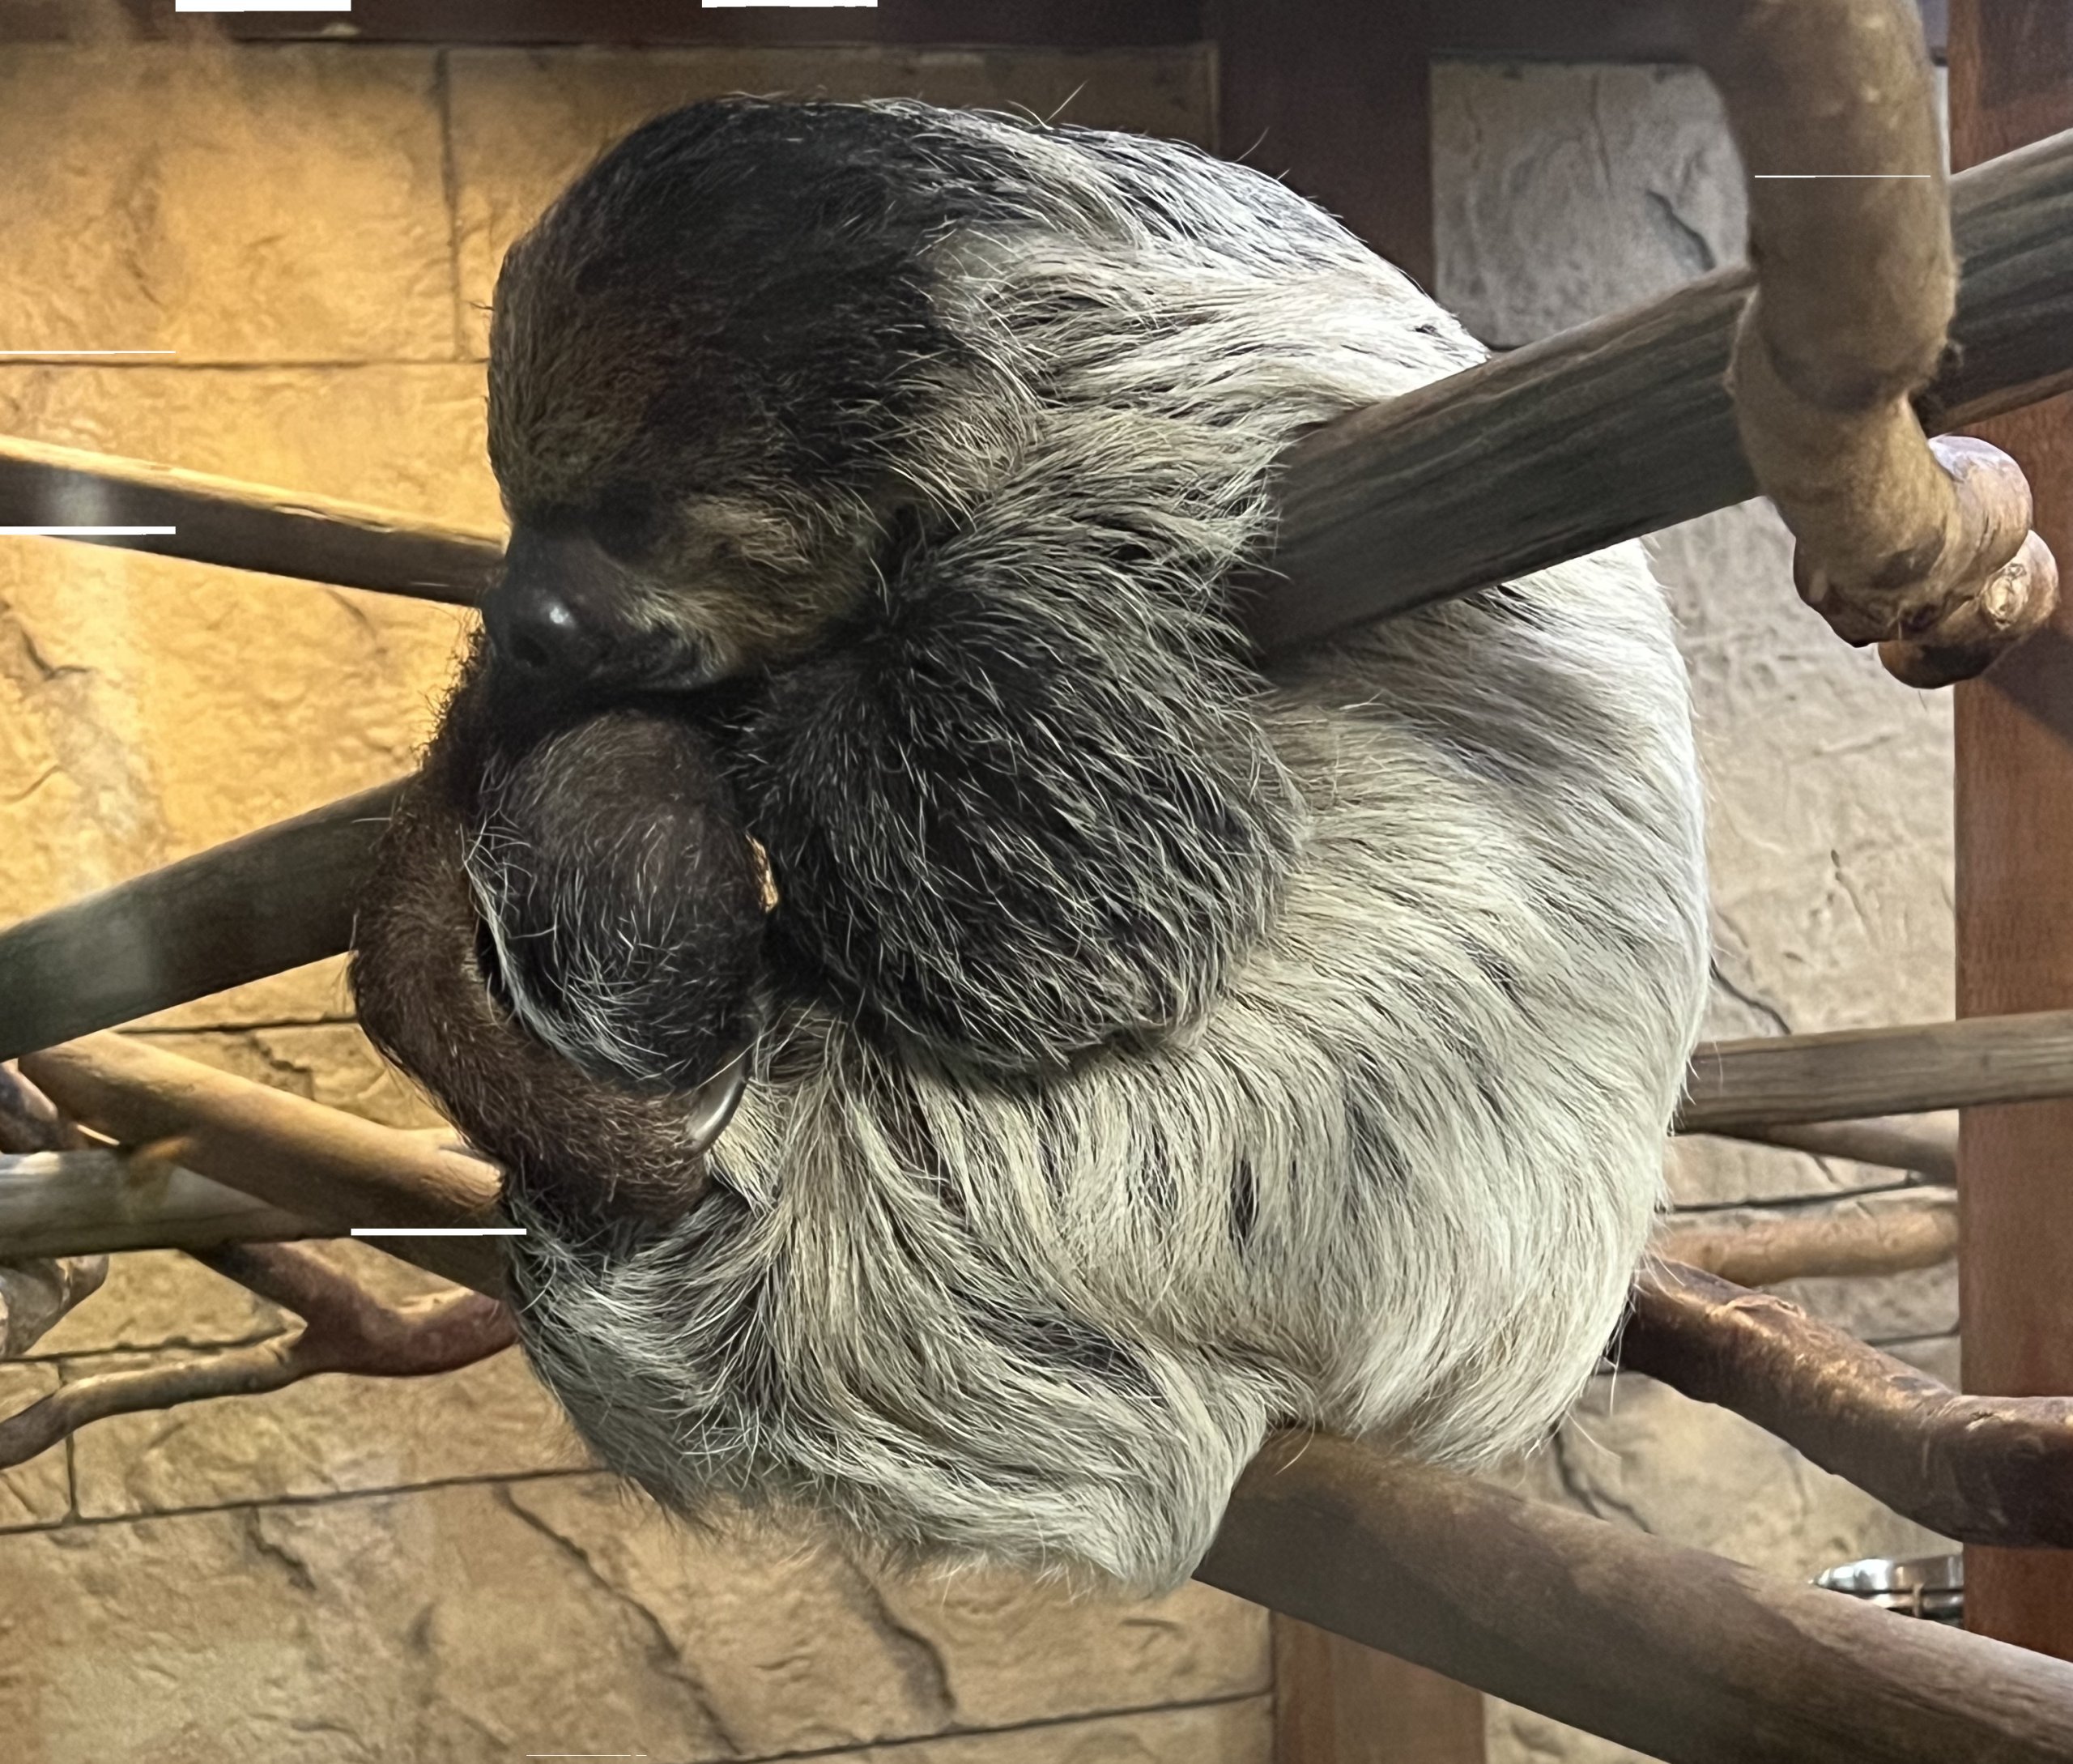 a sloth curled around a piece of wood in an enclosure